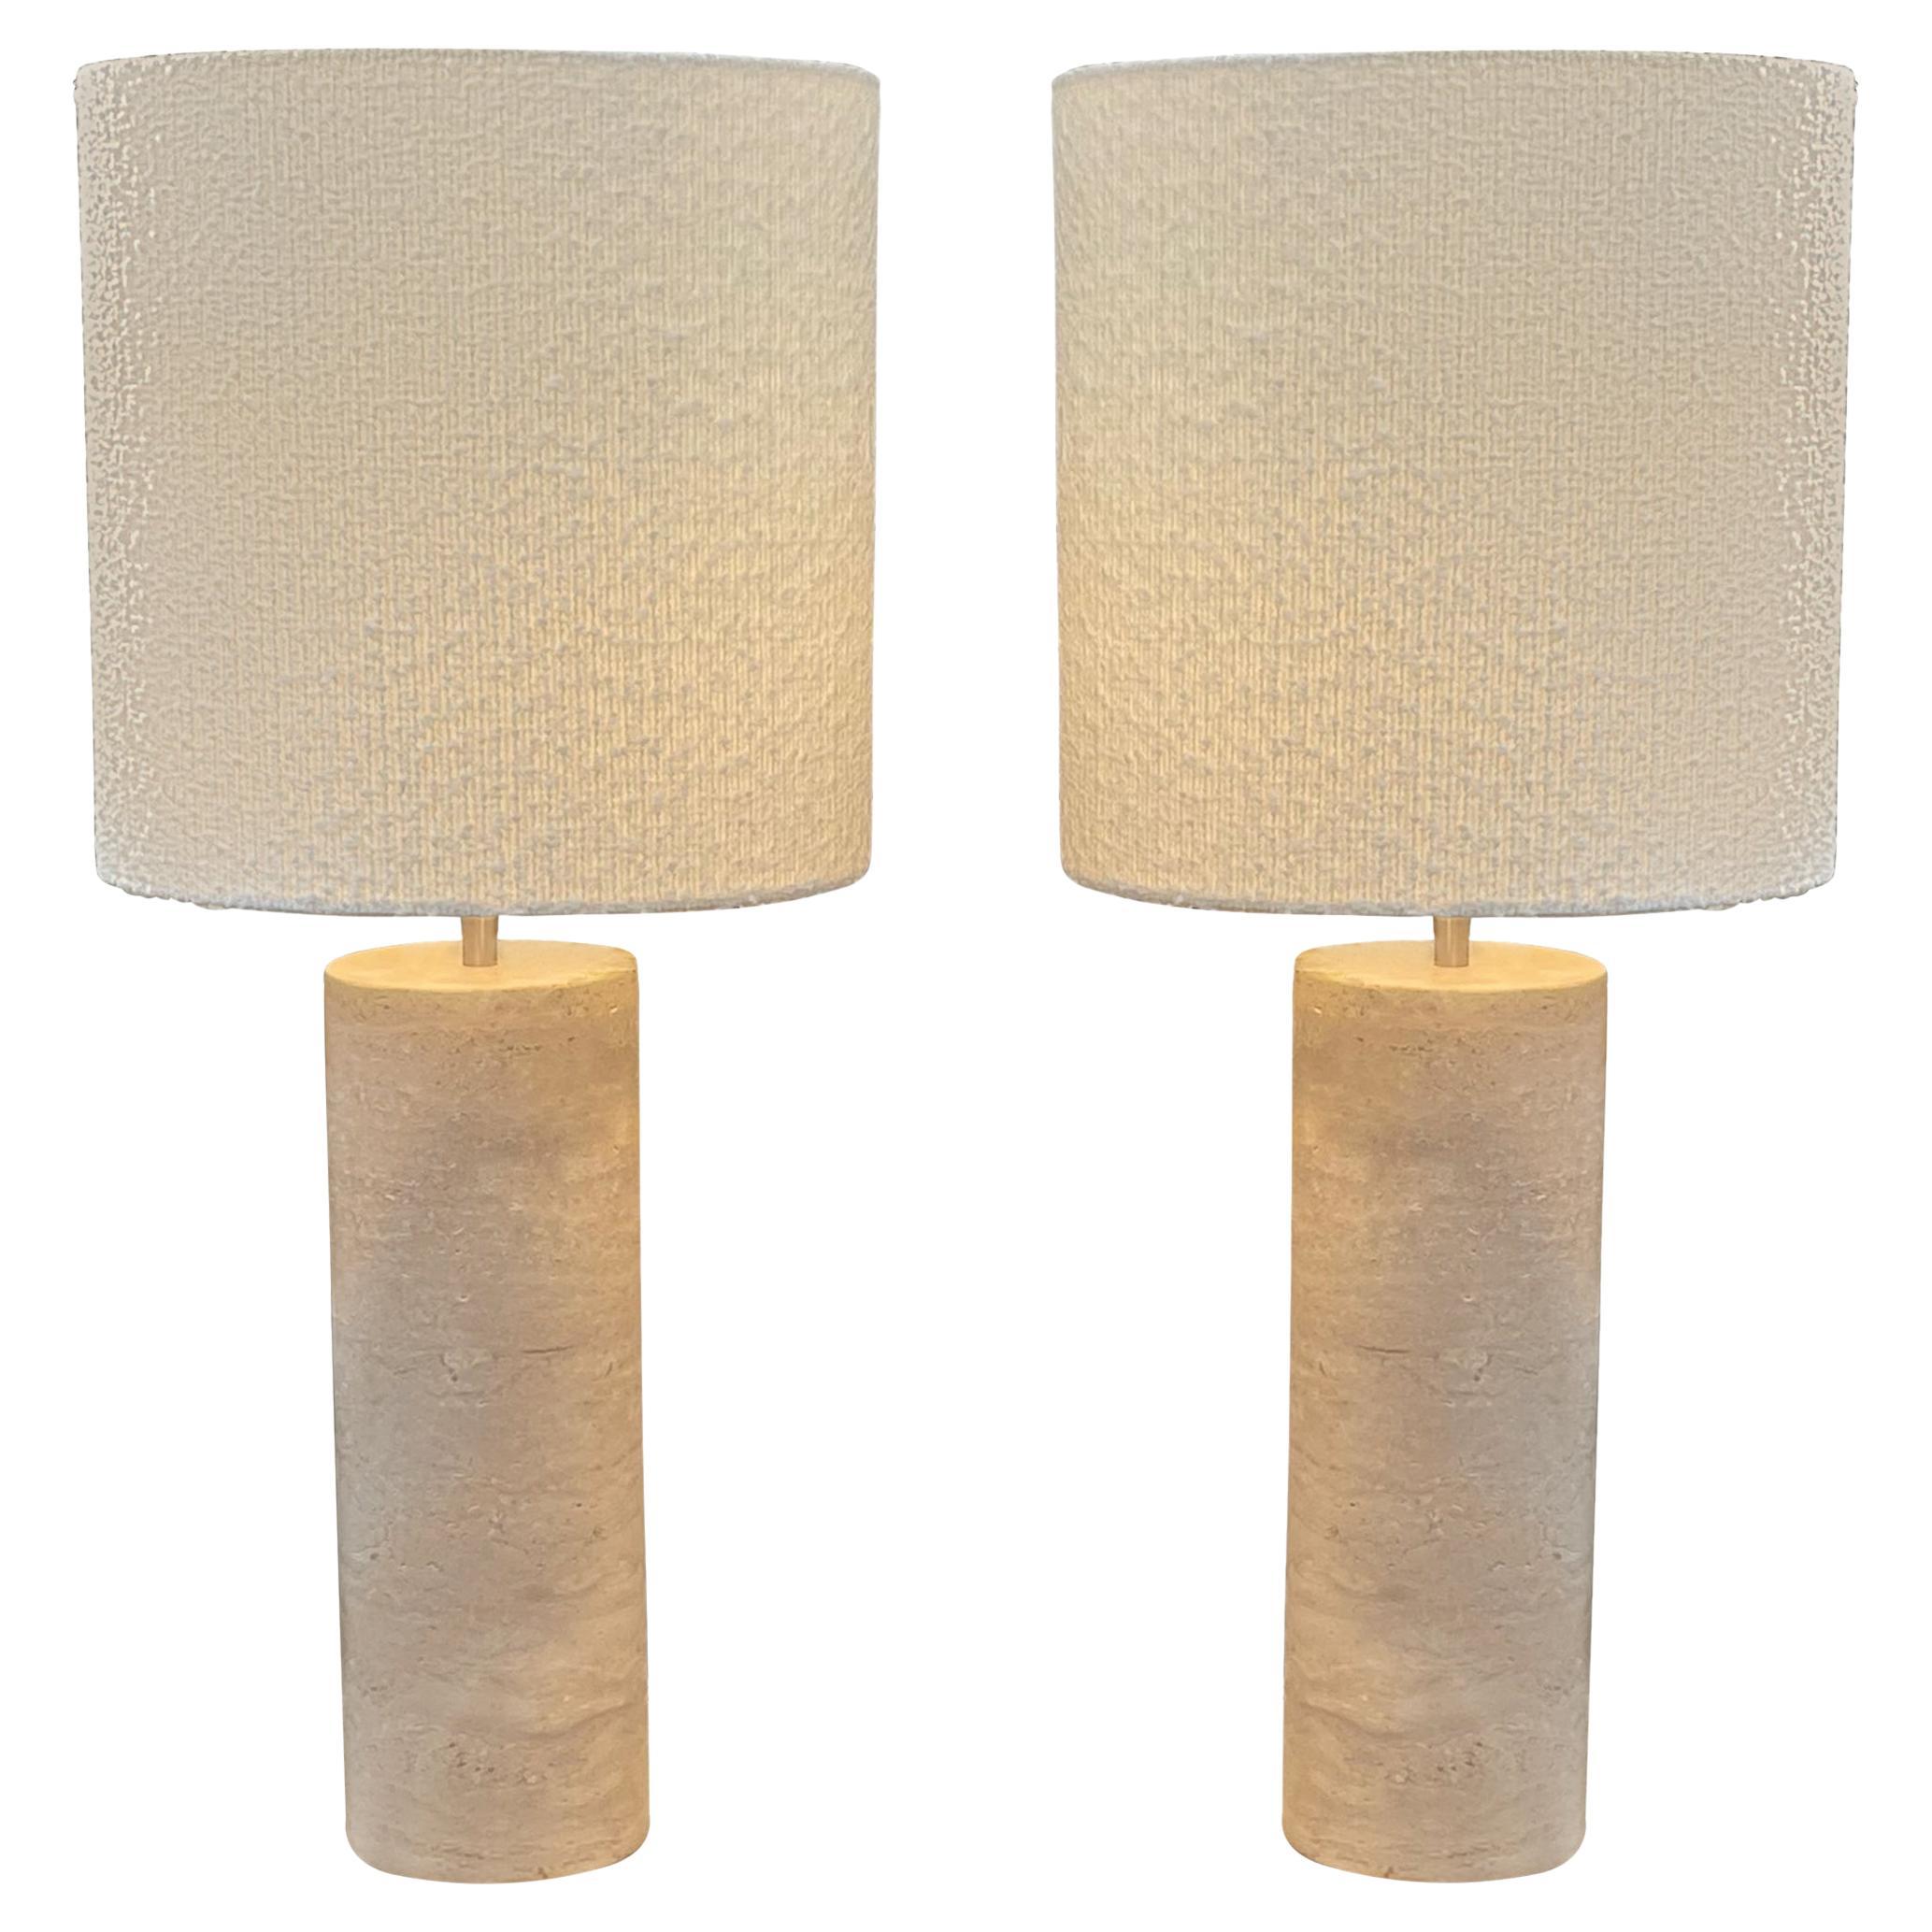 Travertine Tall Cylinder Shape Pair Lamps, Netherlands, Contemporary For Sale